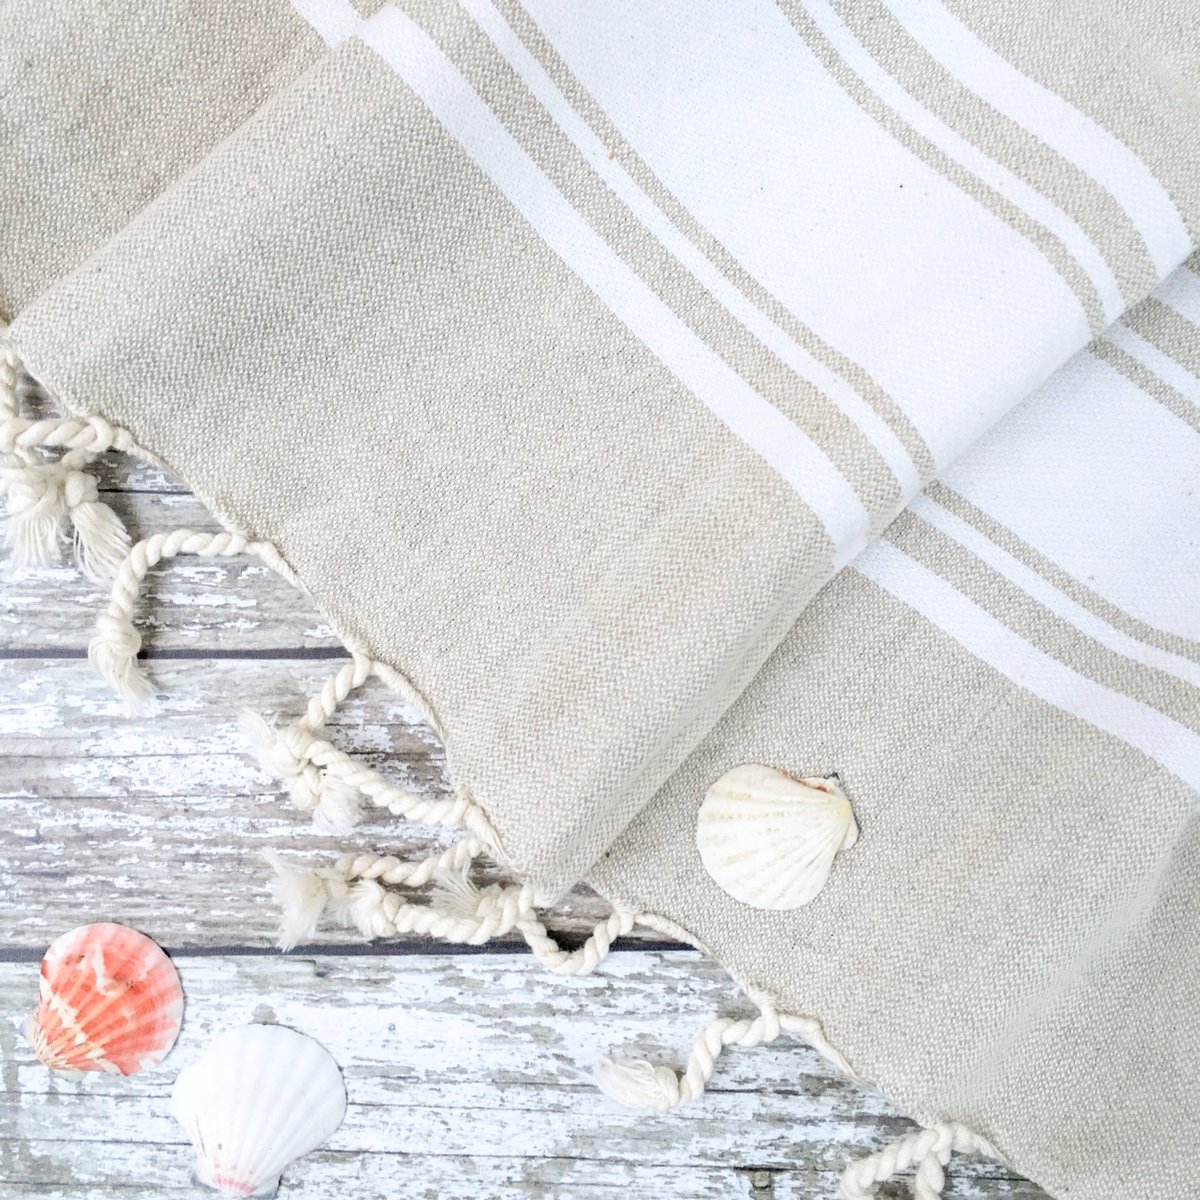 💥 Sneak peak of one of our new designs of hammam towels for SS18 - beautifully soft washed linen in natural hues - available on the website soon - hope you love! x 💥
#sandandsalt #beachlife #beachvibes #hammamtowel #packlight #holidayaccessories #beachaccessories #holidayinspo